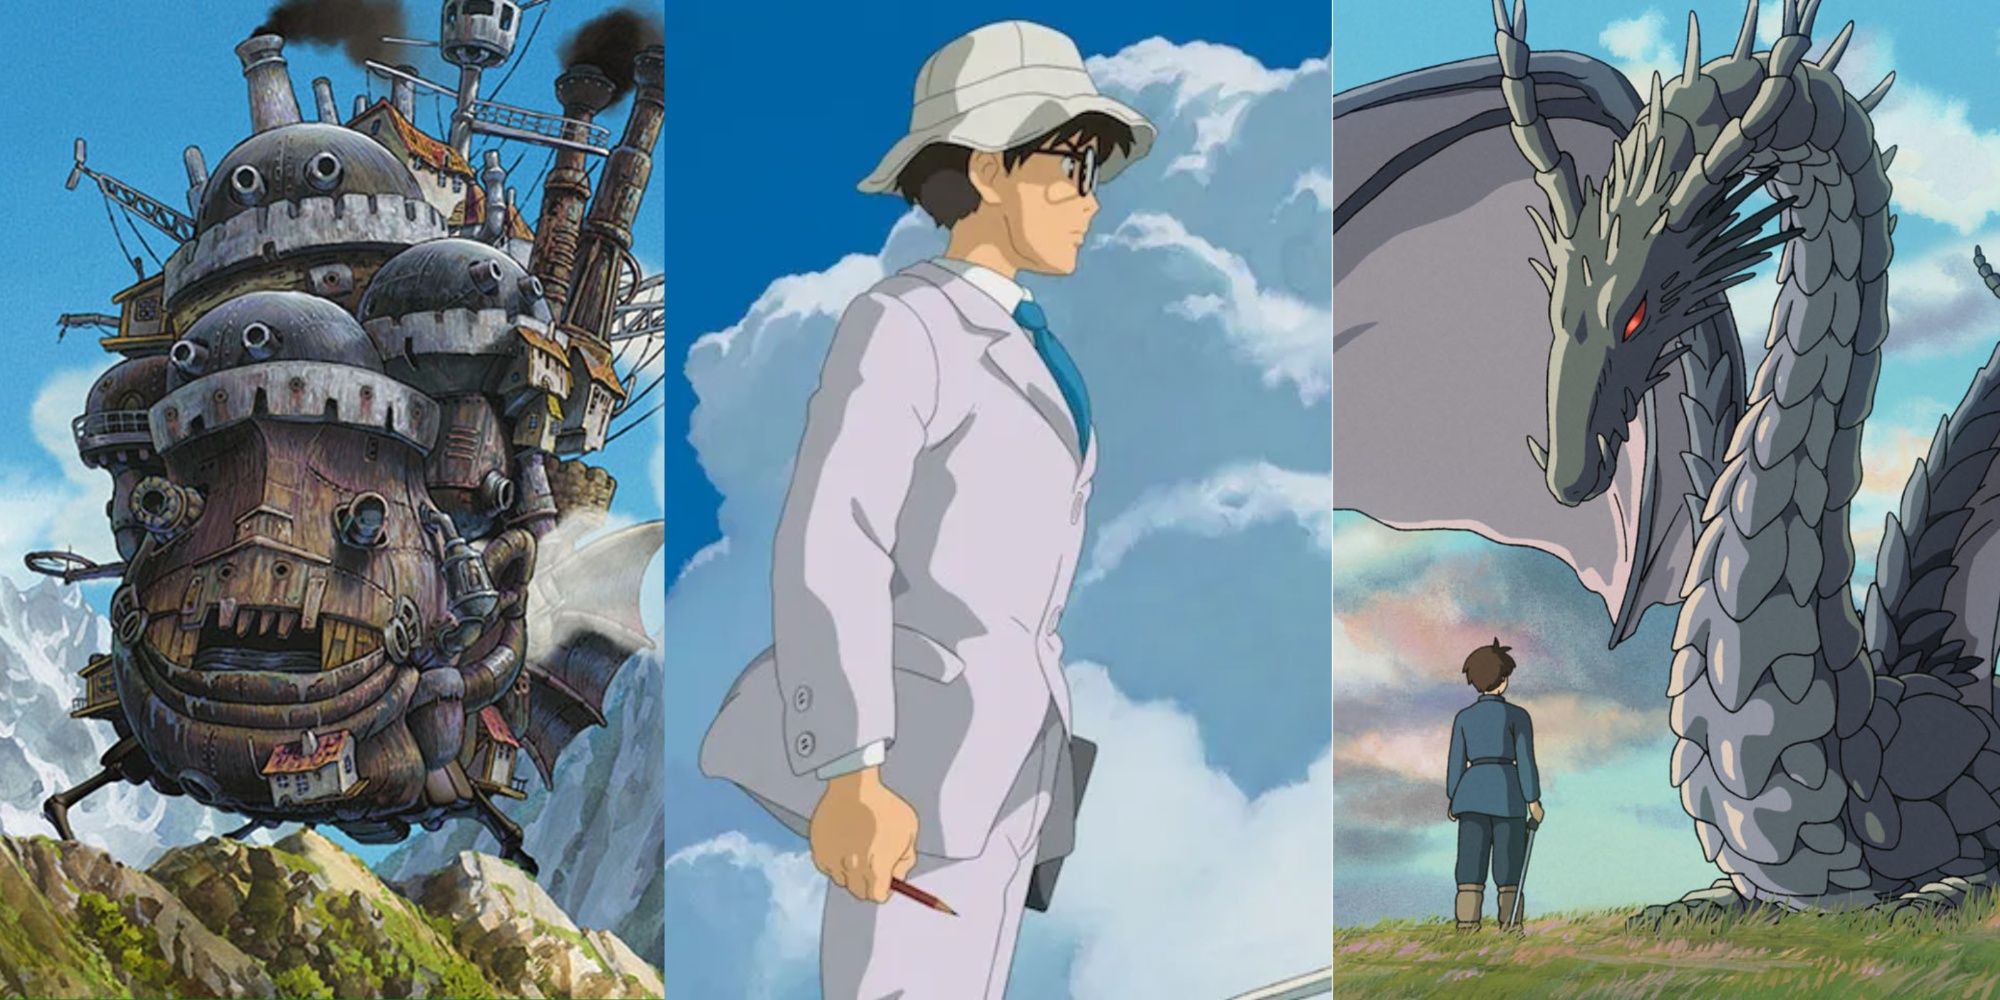 Where to watch Studio Ghibli films from anywhere: stream on